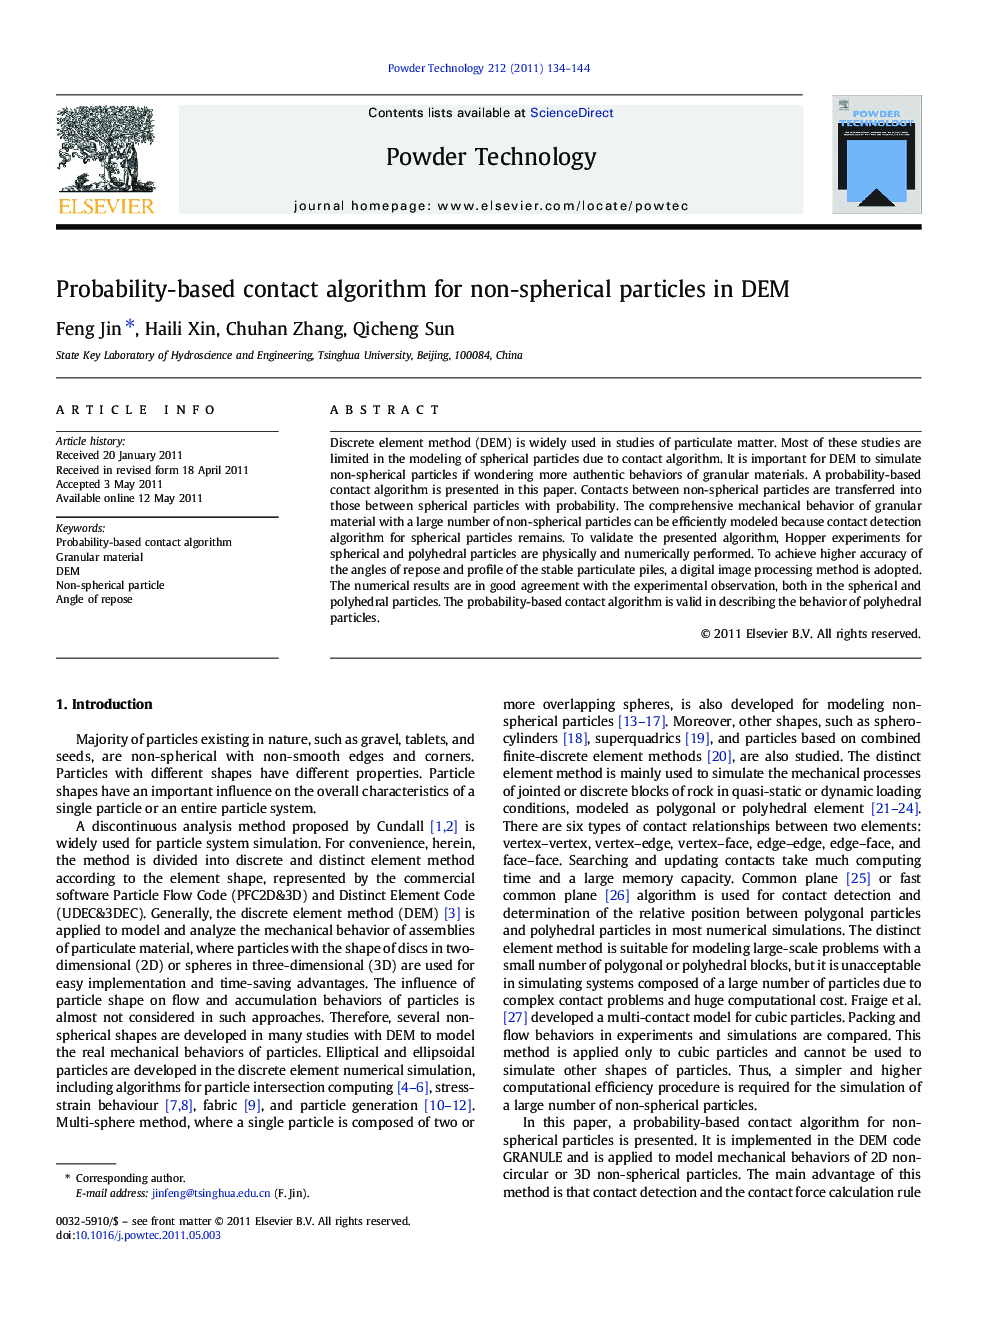 Probability-based contact algorithm for non-spherical particles in DEM